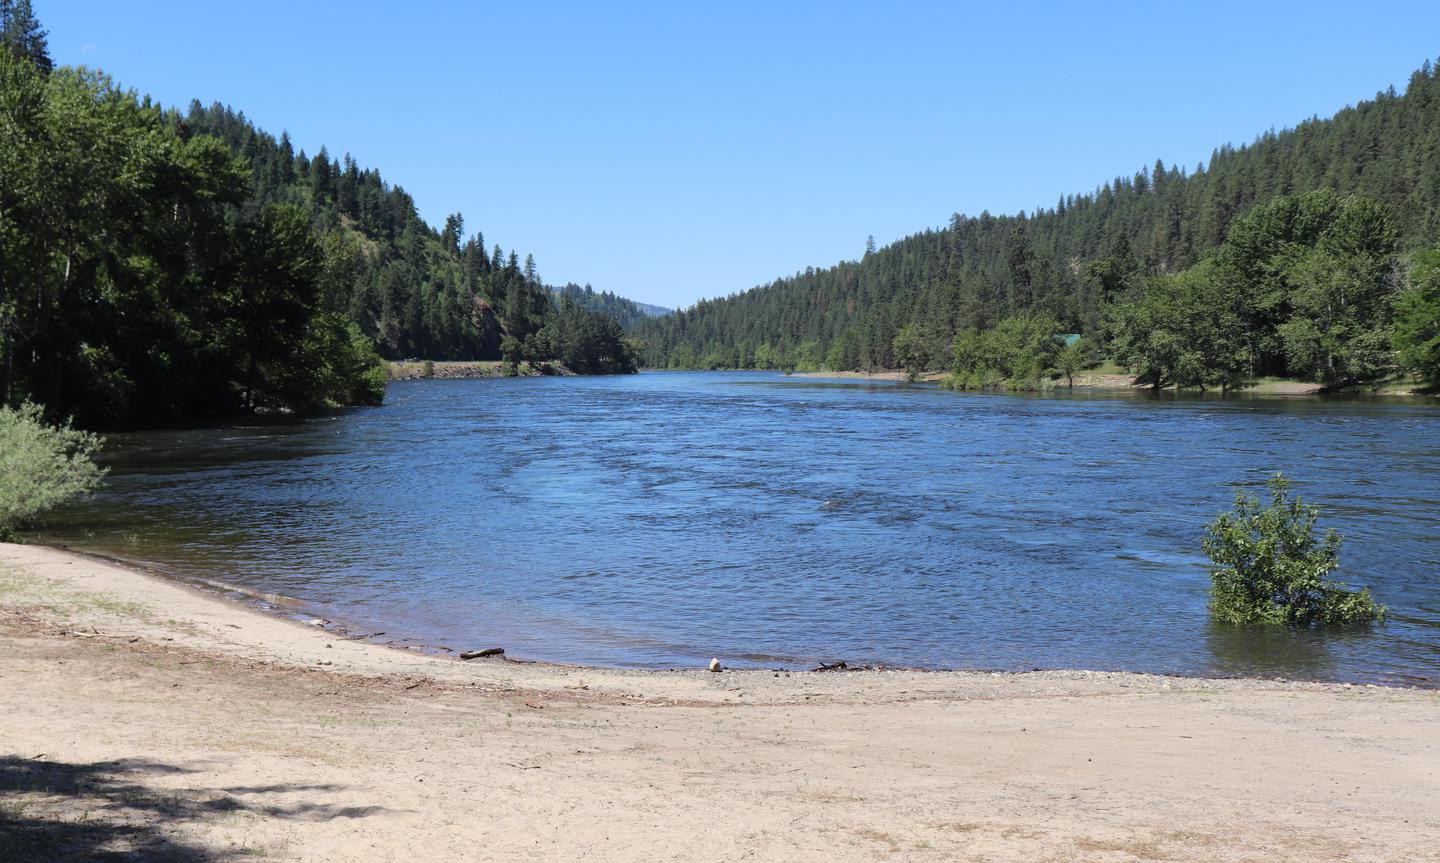 Large sandy beach offered at Pink House Recreation Site.Pink House Recreation Site offers a large sandy beach on the Clearwater River.